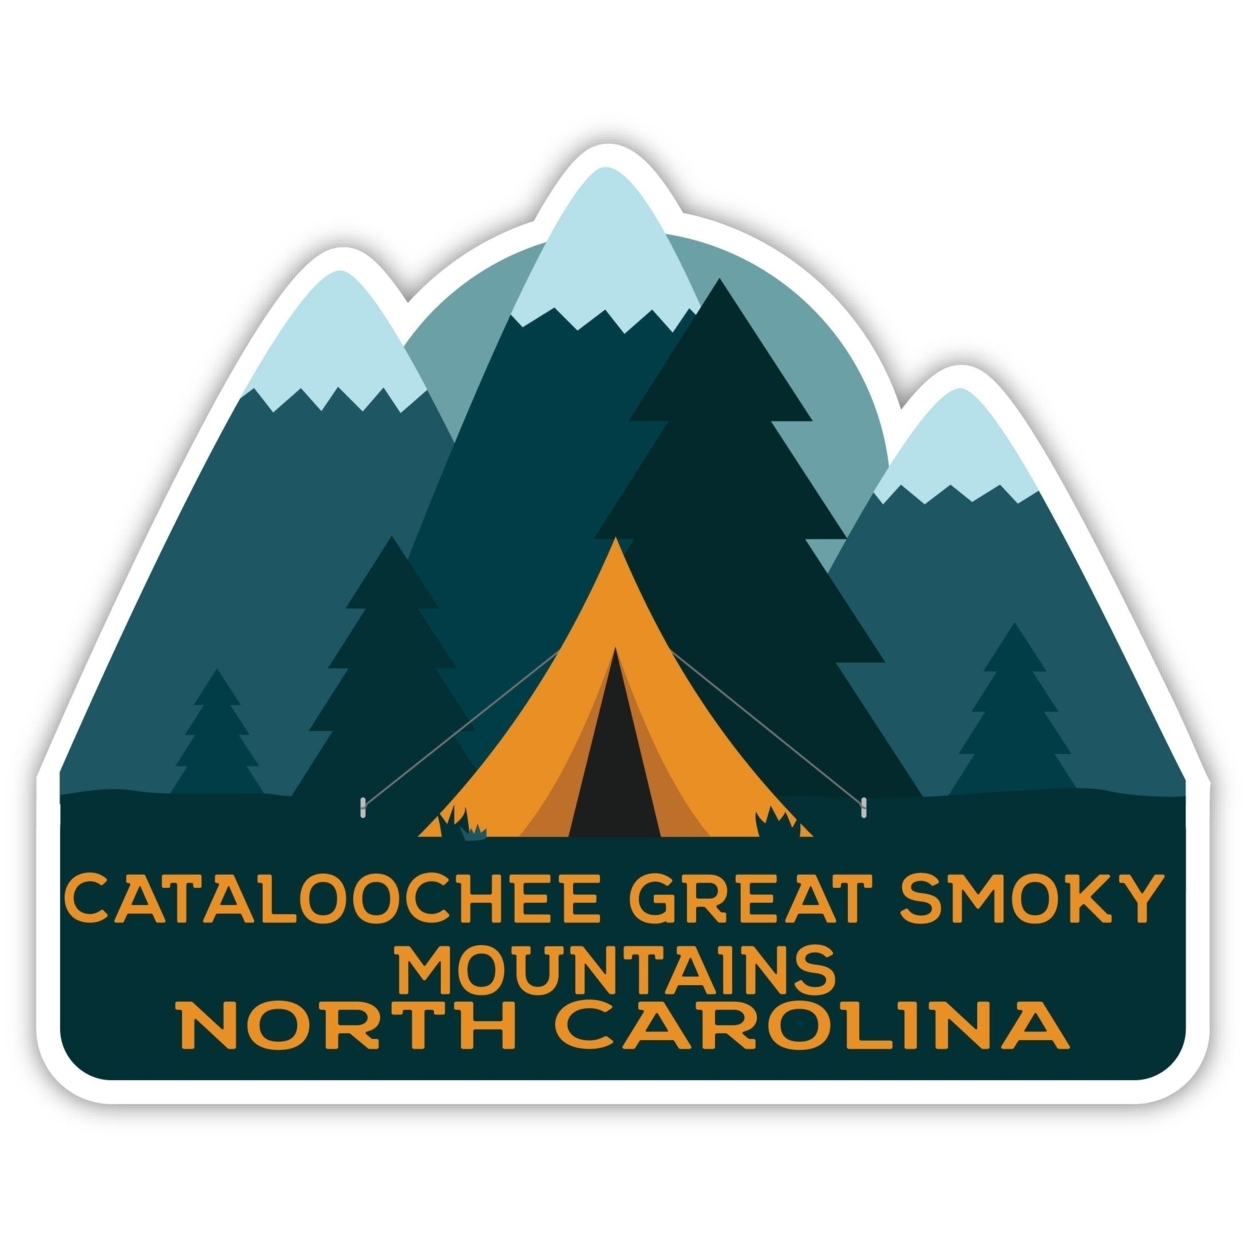 Cataloochee Great Smoky Mountains North Carolina Souvenir Decorative Stickers (Choose Theme And Size) - 4-Pack, 4-Inch, Tent